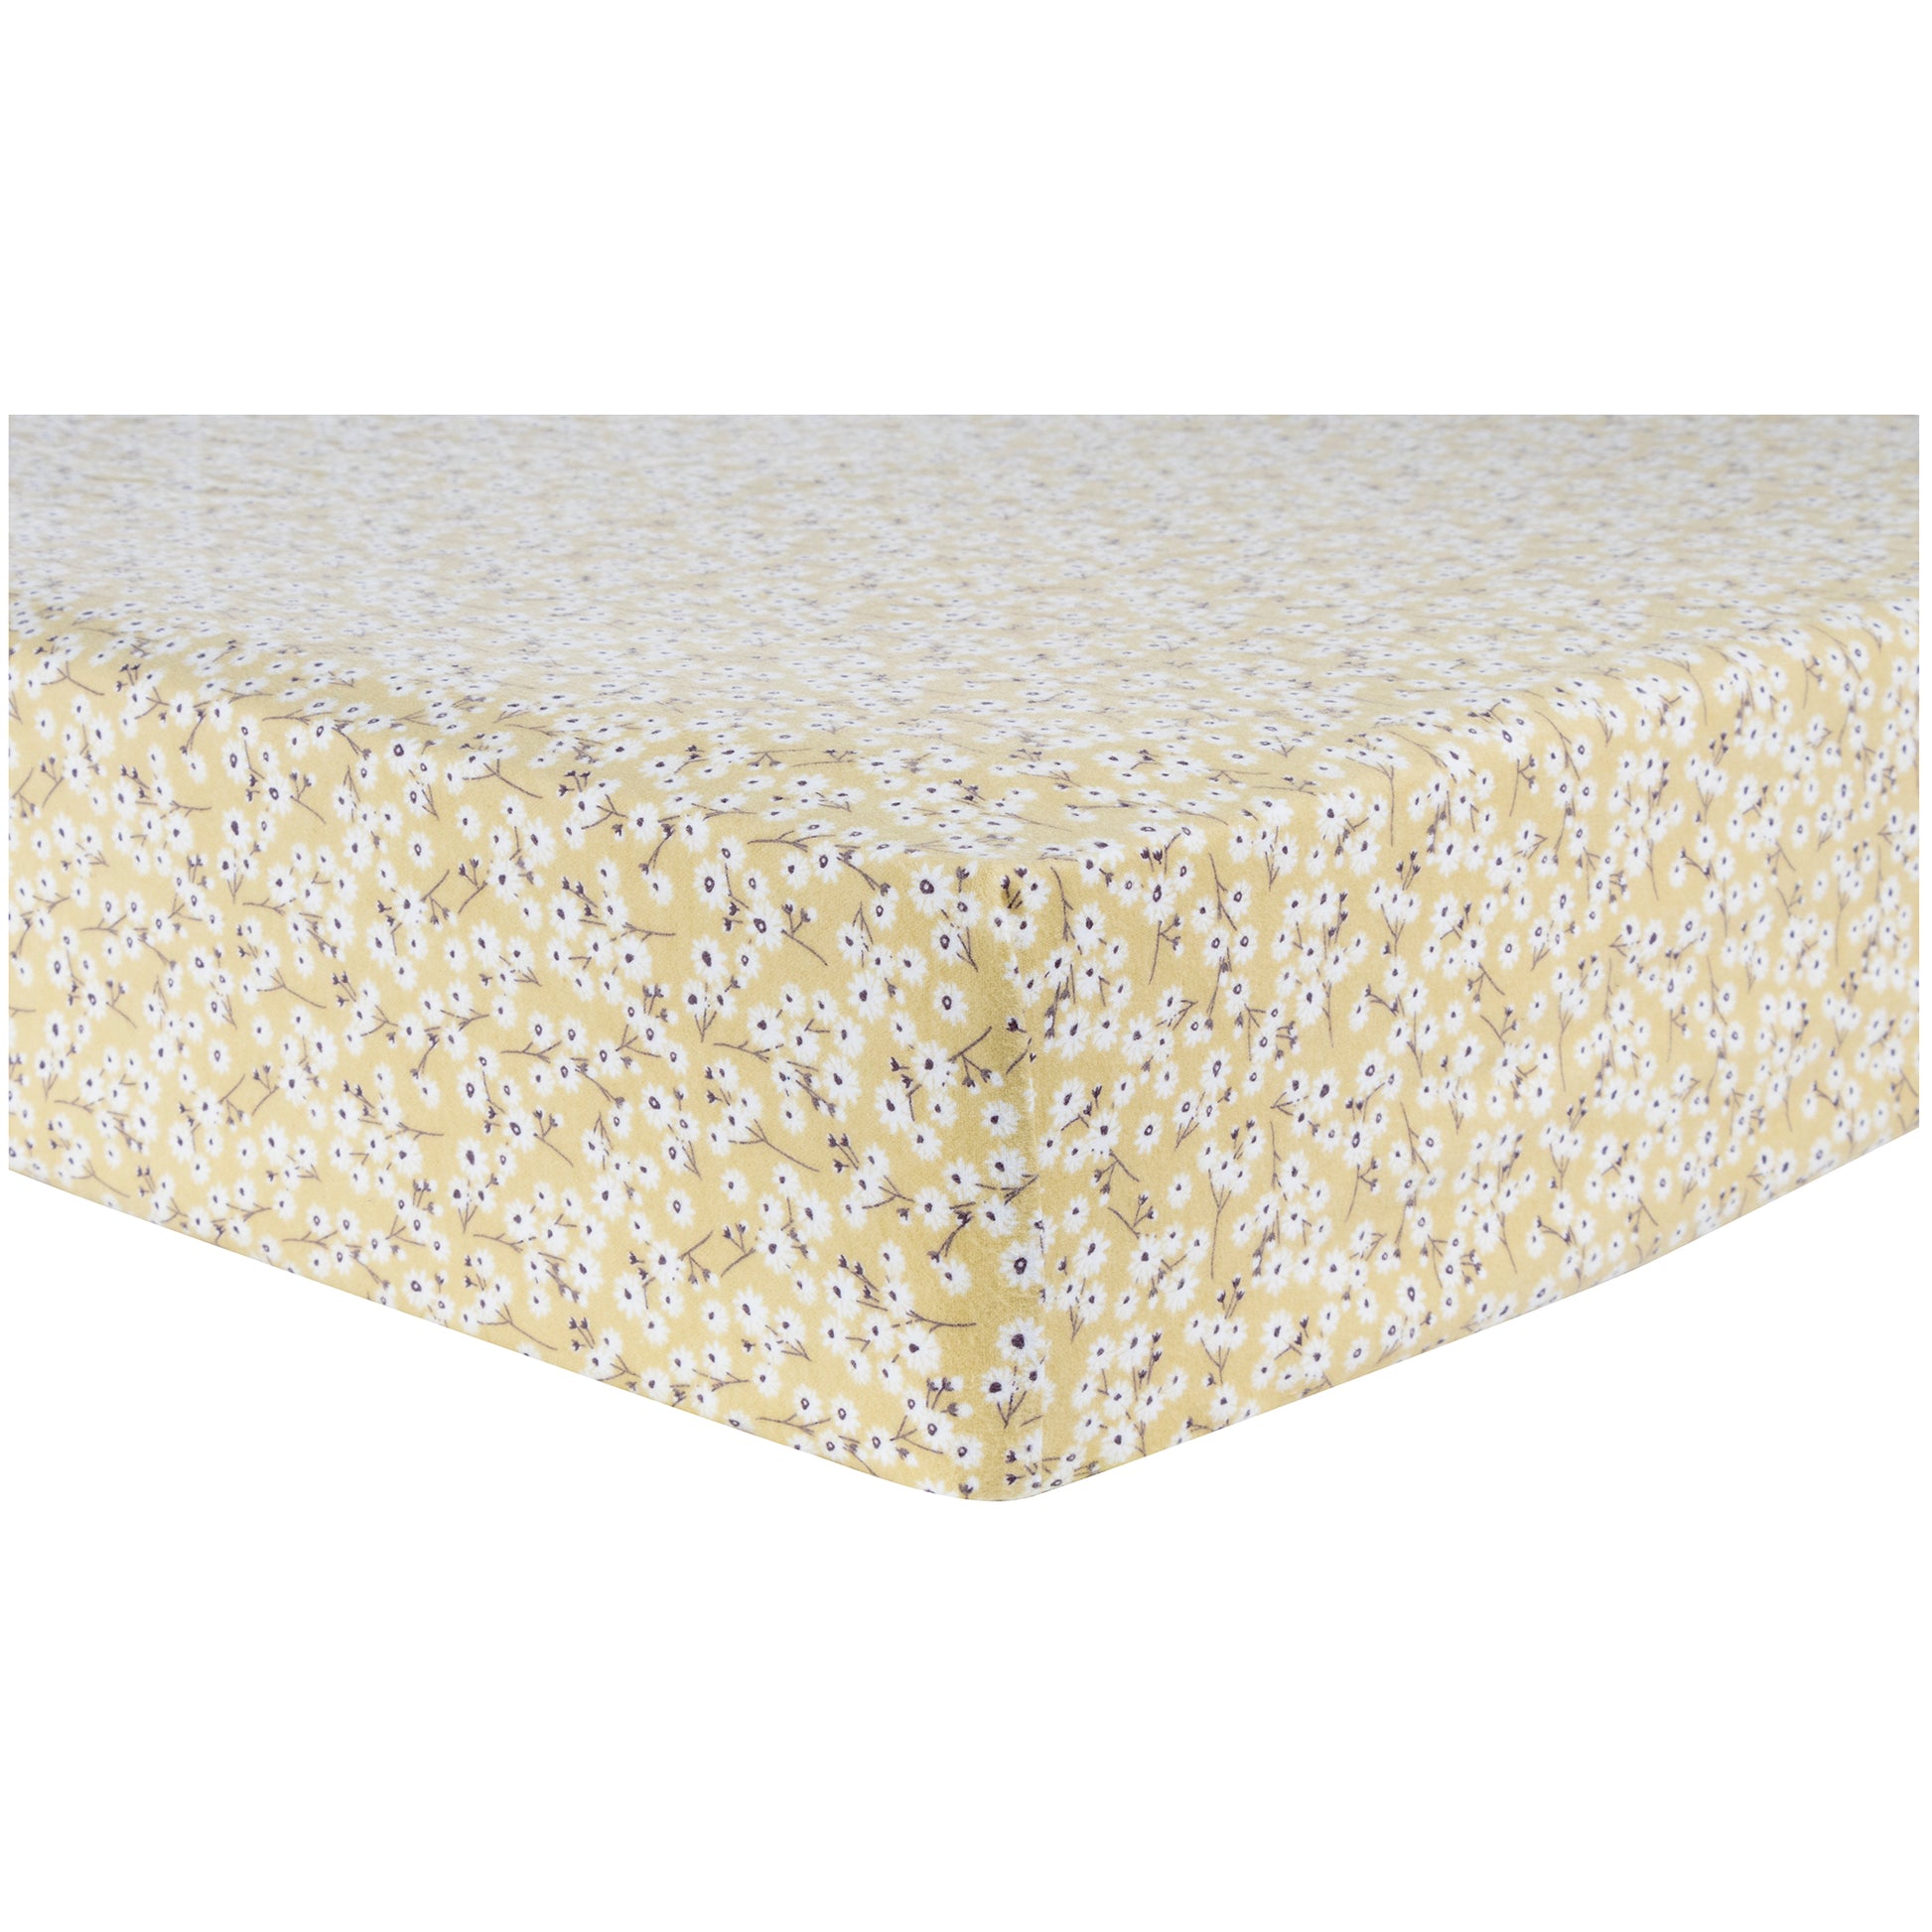  Golden Daisies Deluxe Flannel Fitted Crib Sheet -corner view